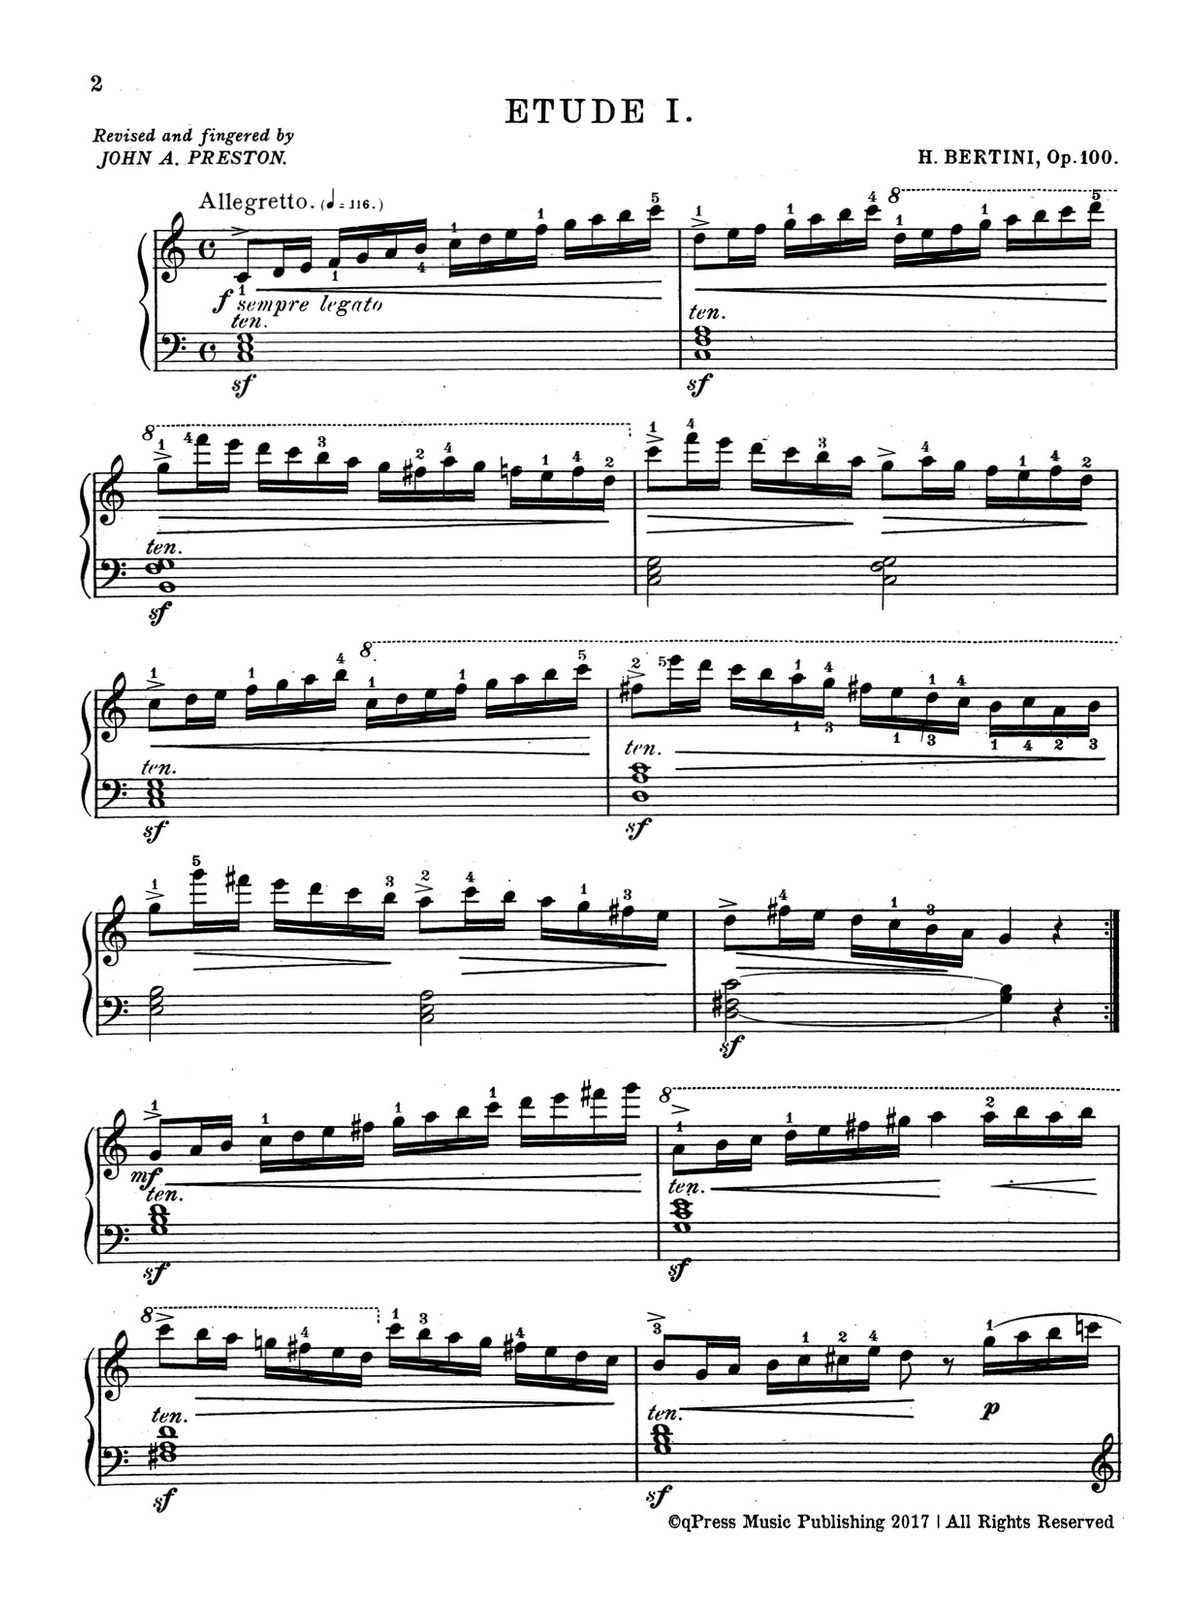 Bertini, 25 Easy Etudes Without Octaves for Piano, Op.100-p02